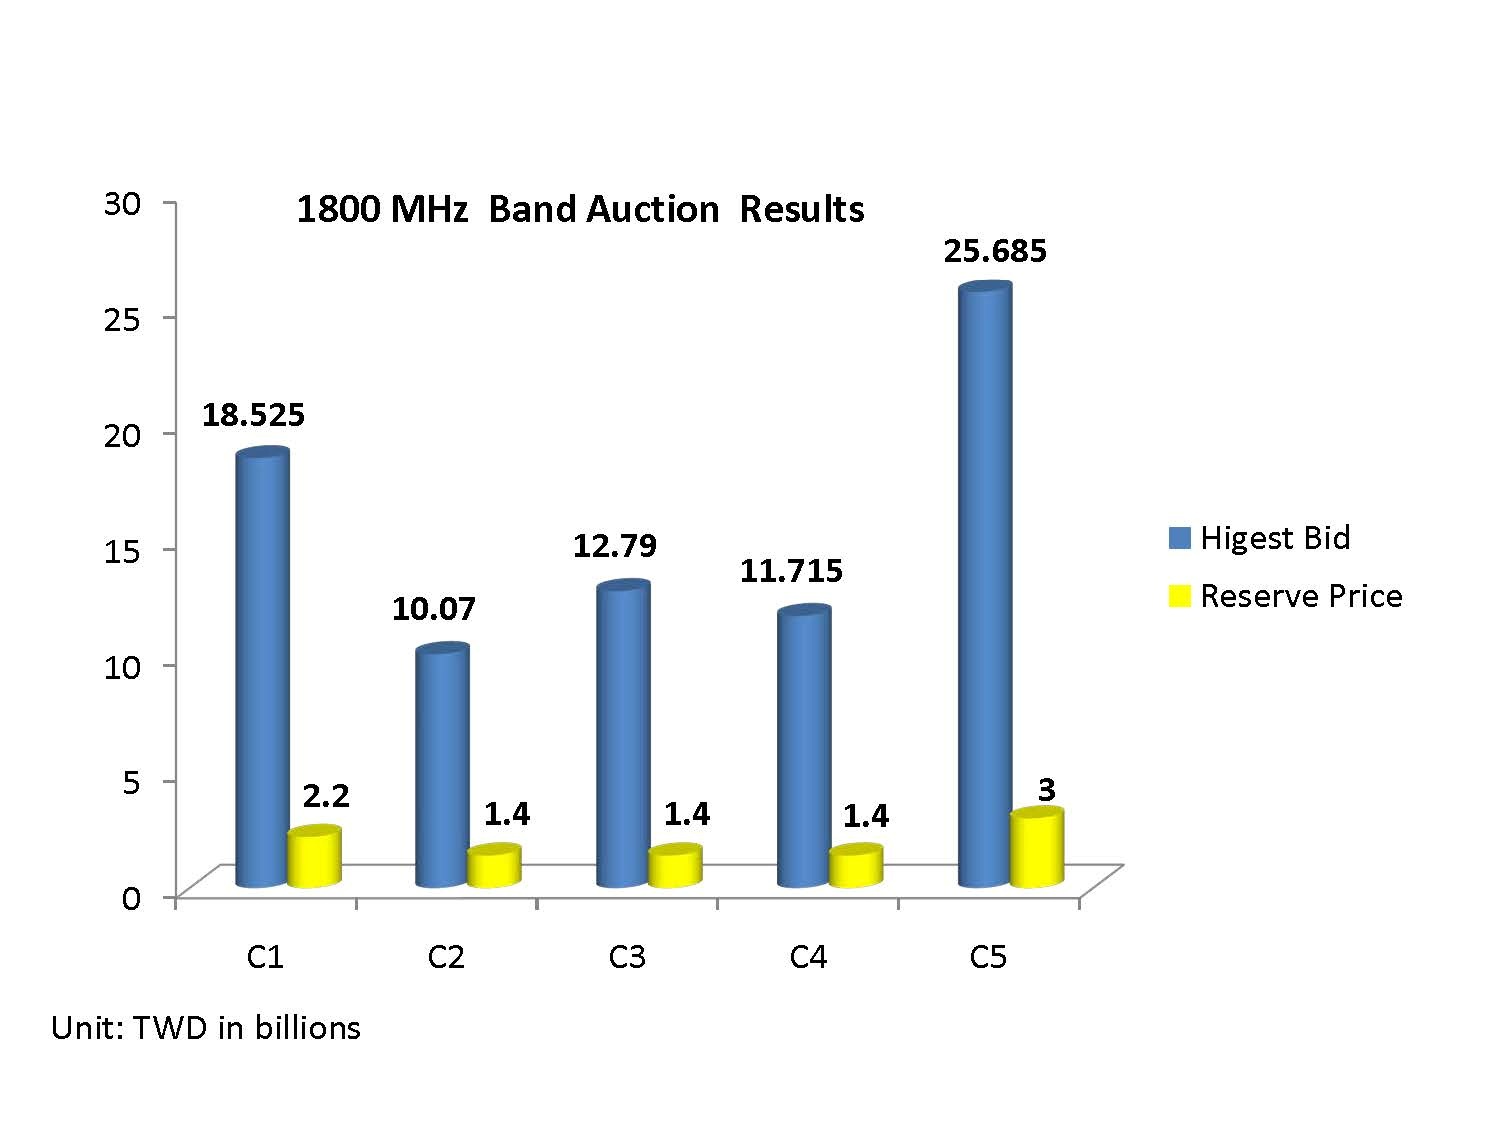 1800 MHz Band Auction Results